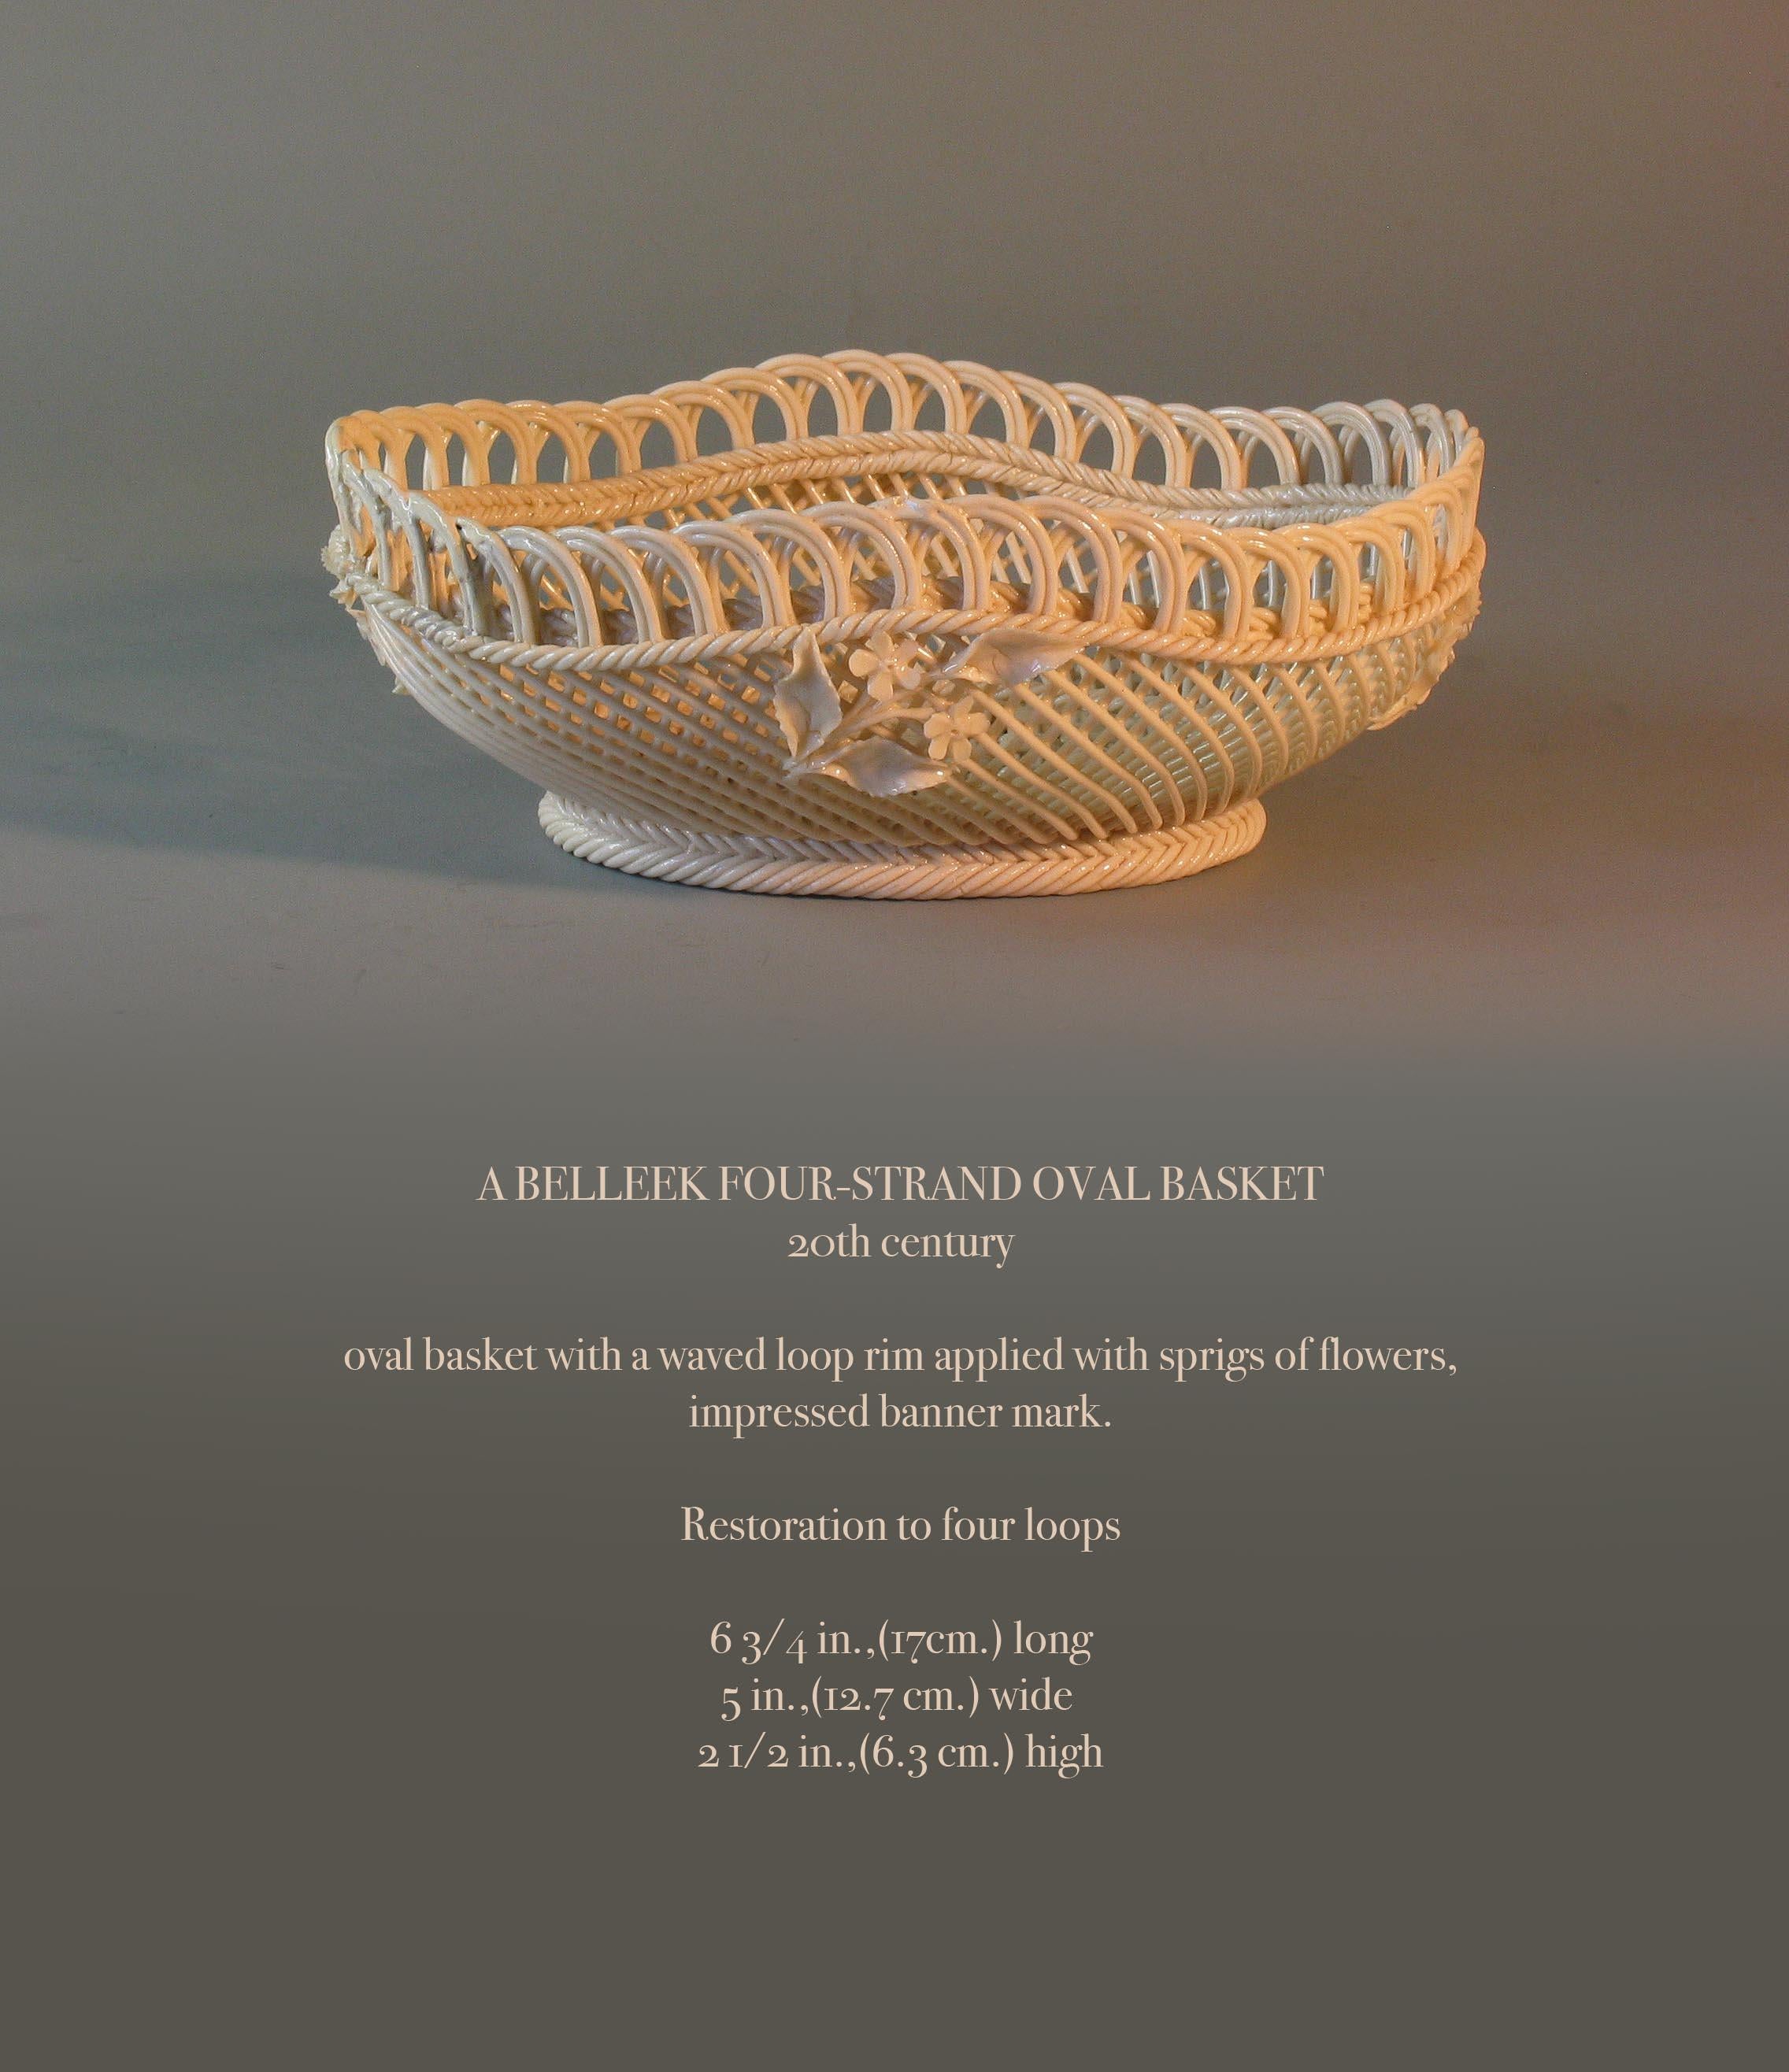 A Belleek four-strand oval basket
20th century

Oval basket with a waved loop rim applied with sprigs of flowers,
impressed banner mark.

Note:
Restoration to four loops, as in photo's.

Measures: 6 3/4